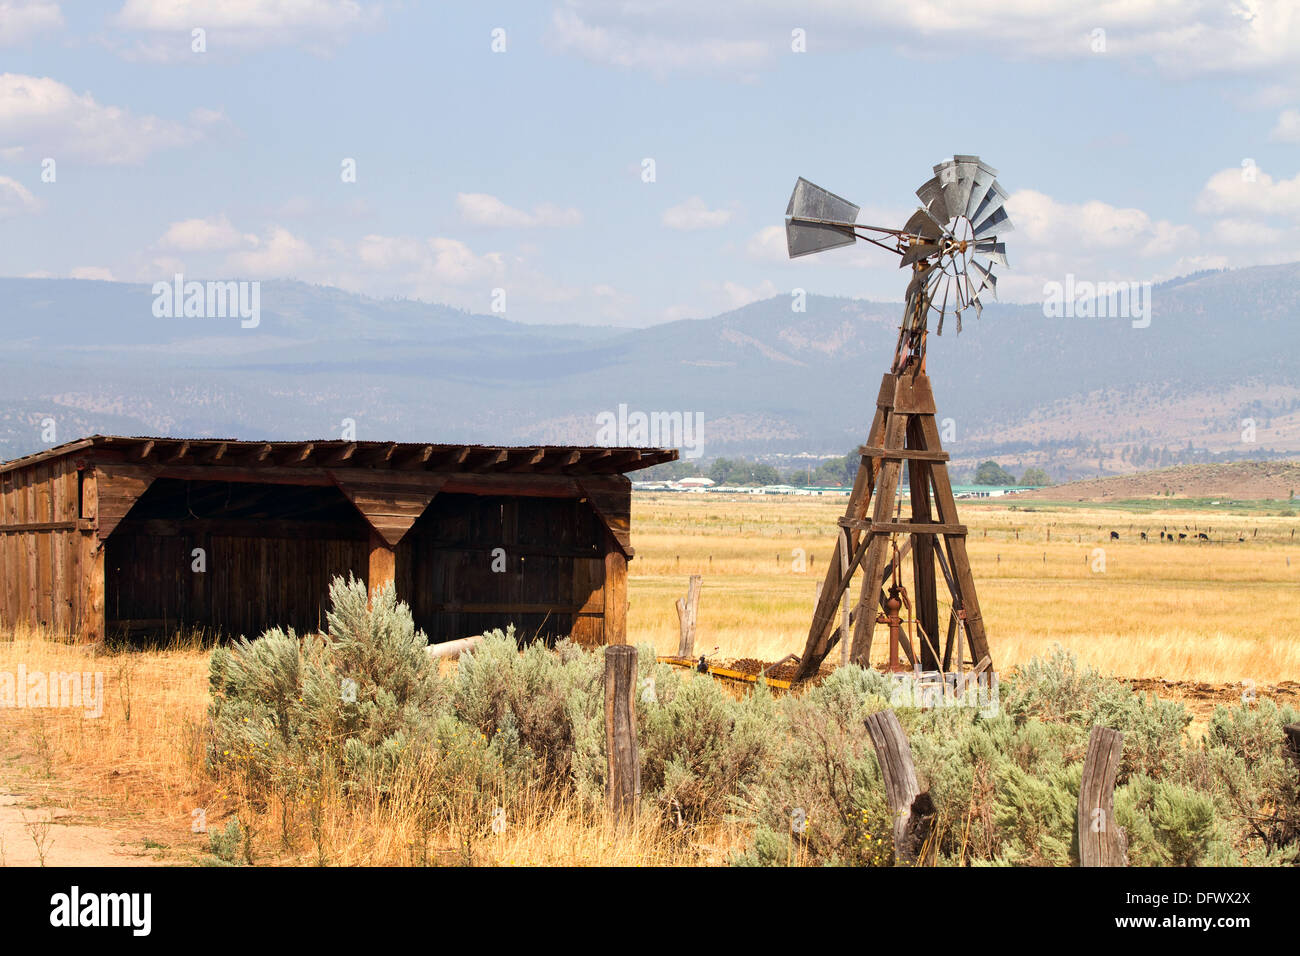 Old wind driven water pumping windmill stands next to an empty storage shed on a cattle ranch in a California mountain valley. Stock Photo